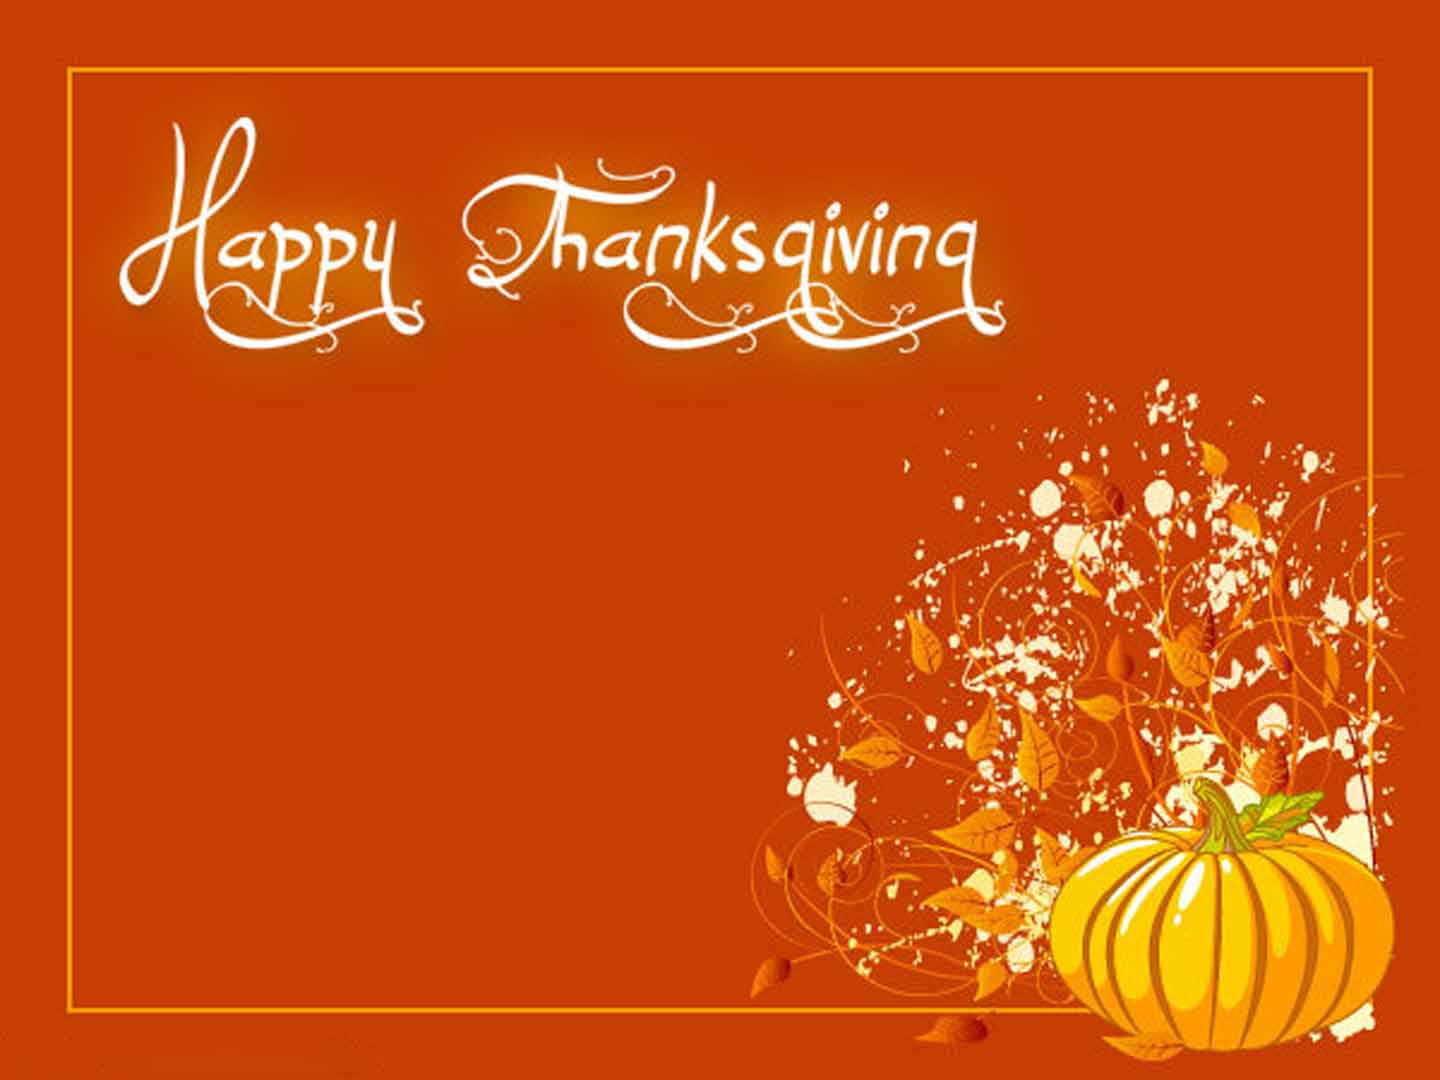 Happy Thanksgiving Wallpapers Widescreen 17263 Wallpapers